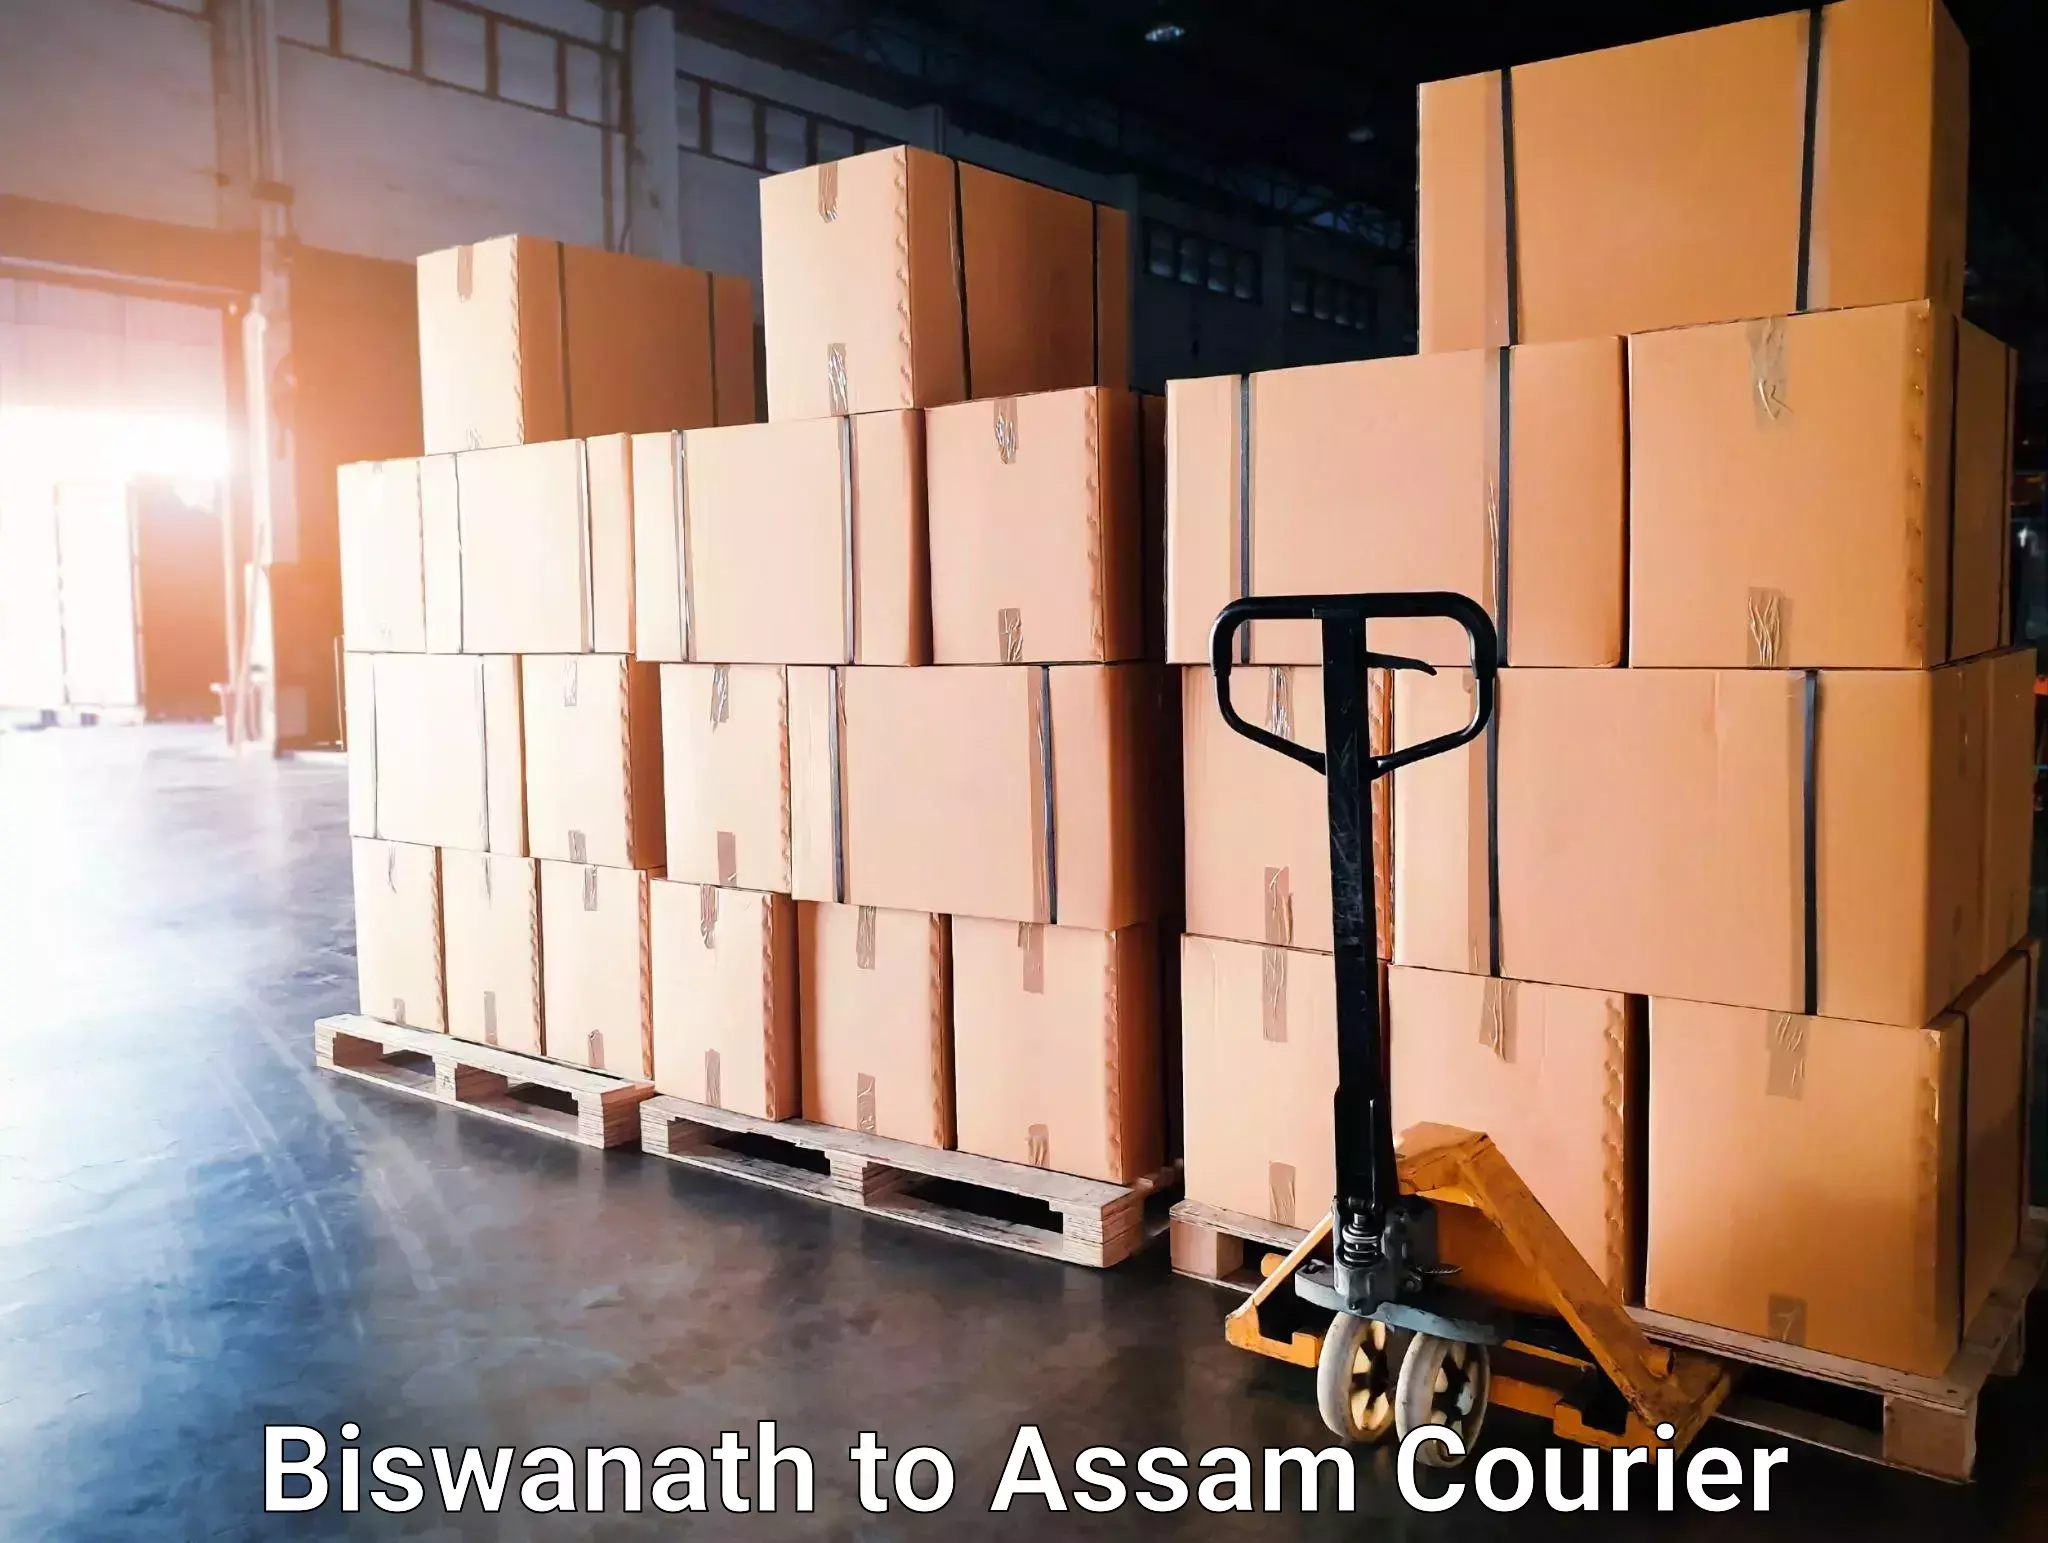 Flexible delivery schedules Biswanath to Chabua